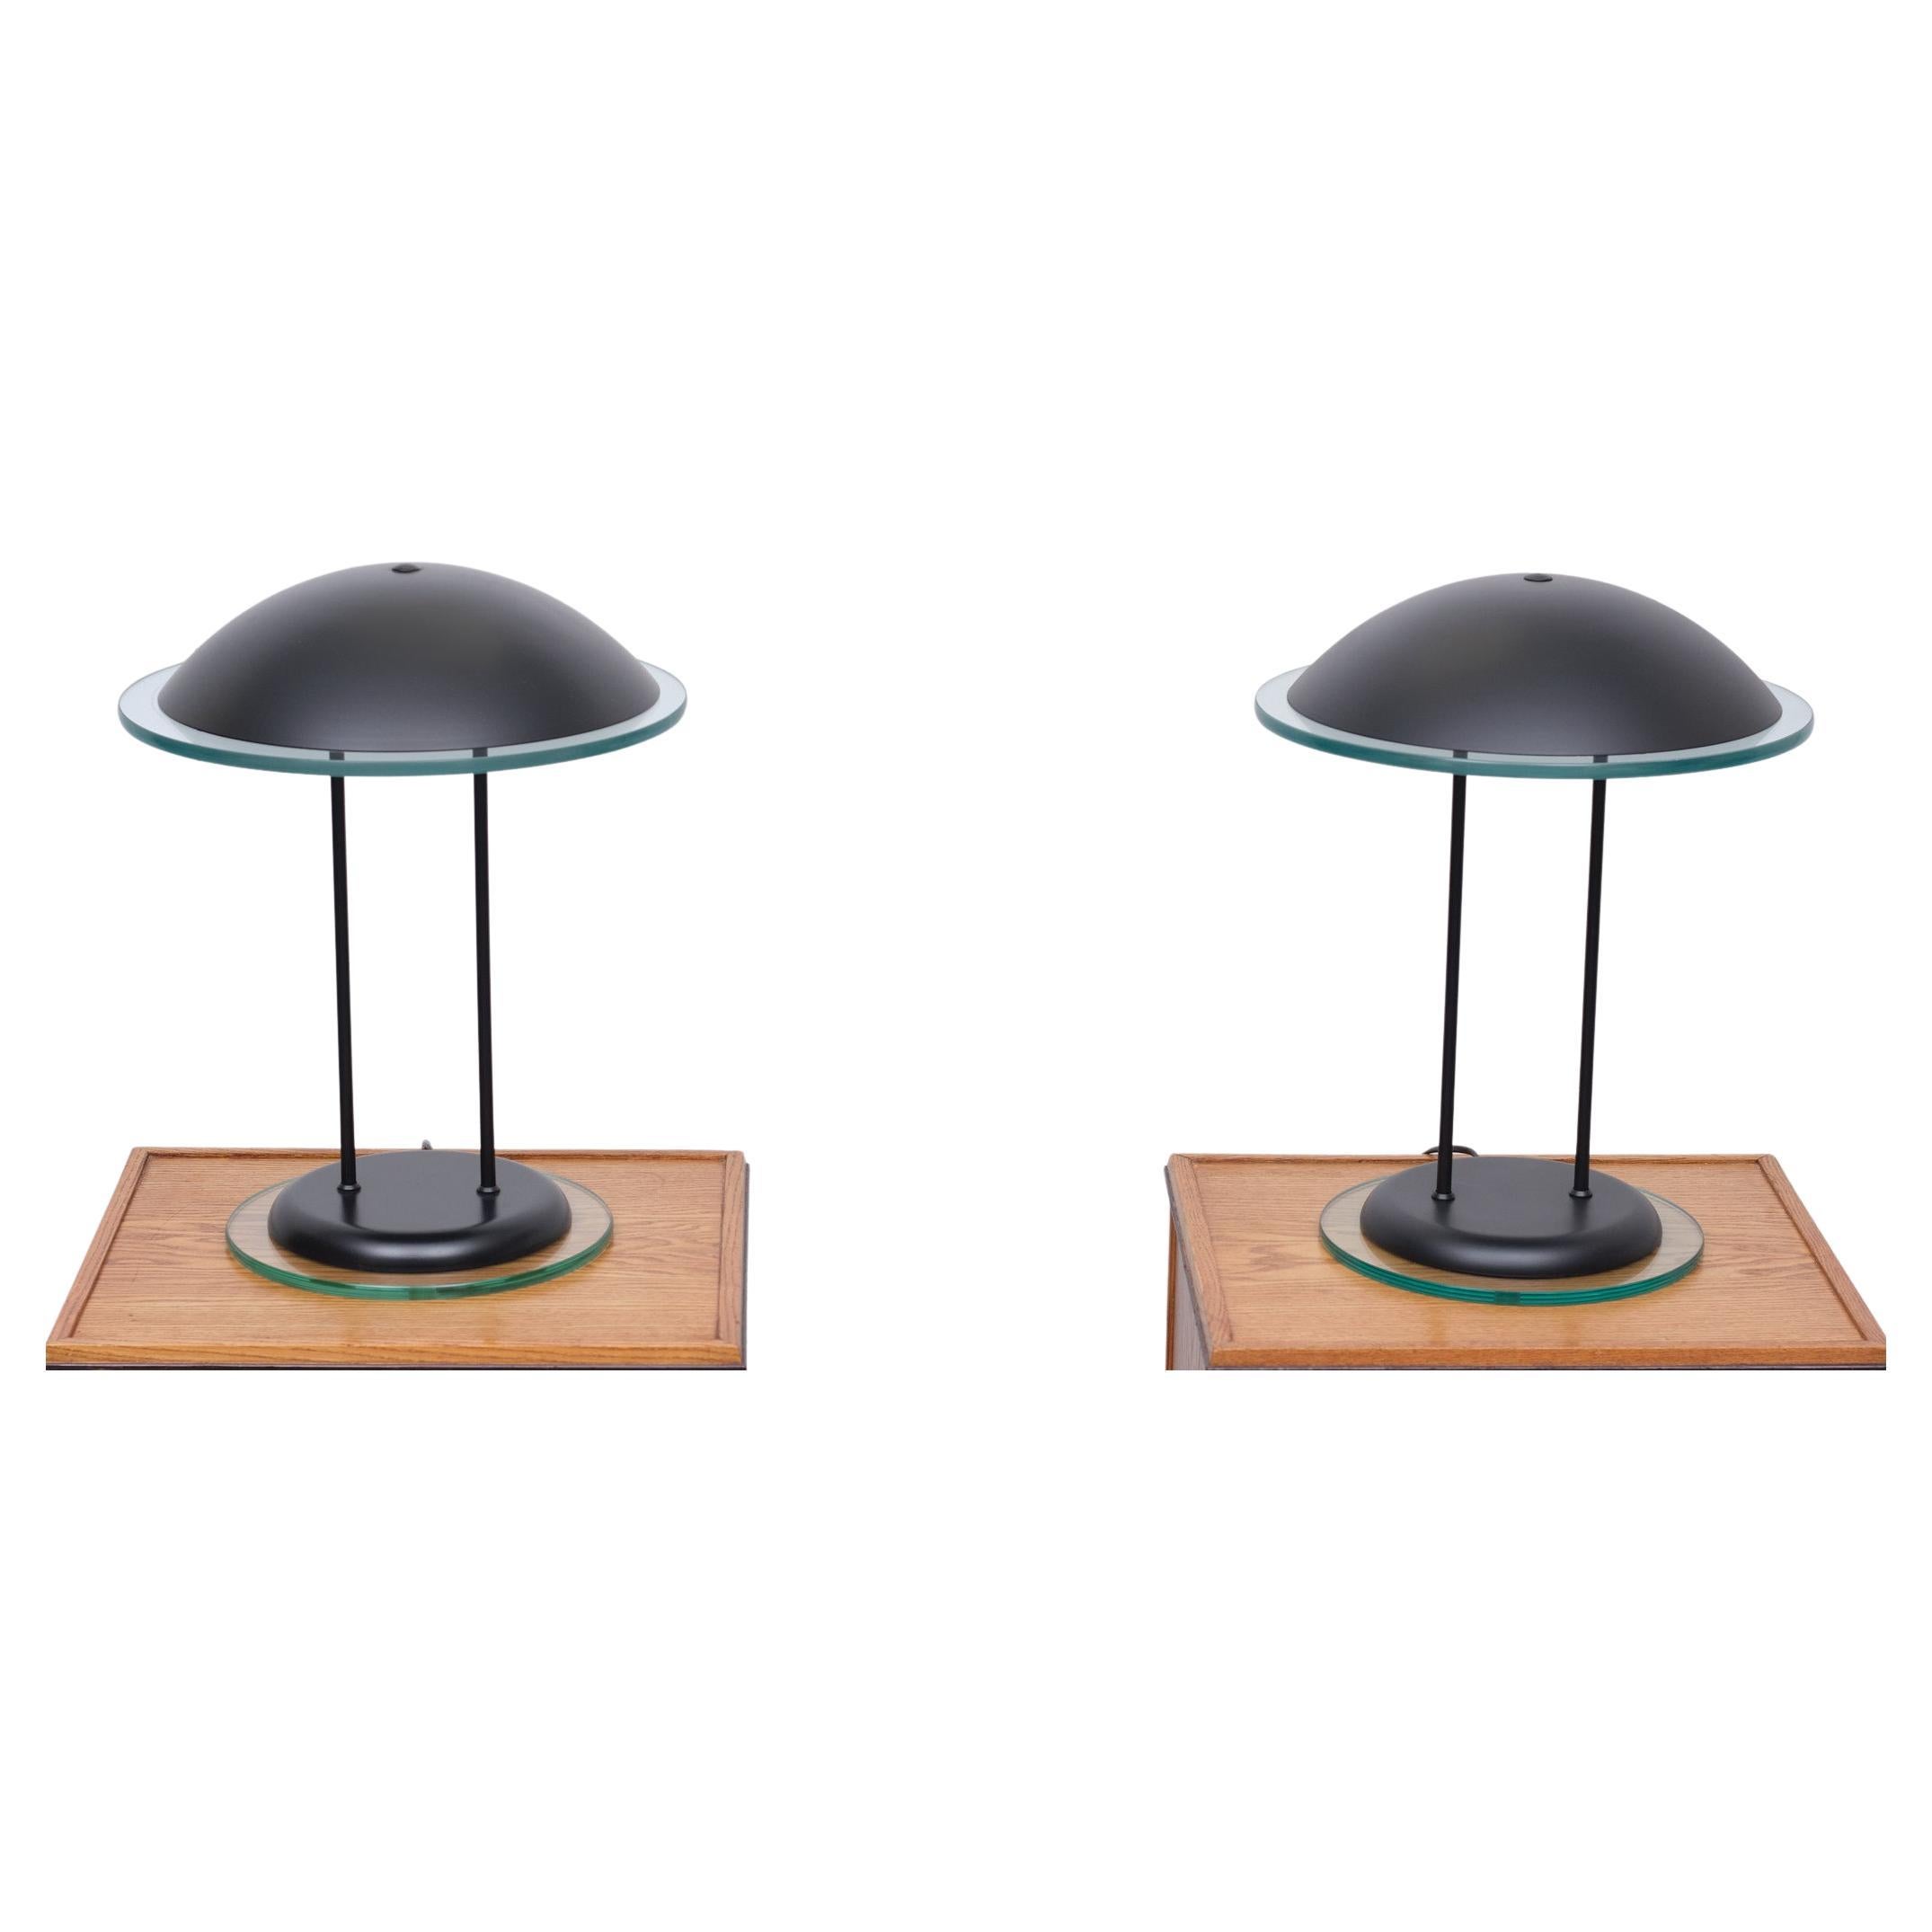 2 very nice post modern Halogen Table lamps. Black metal base, comes 
with Thick Greenish Glass. Good condition.